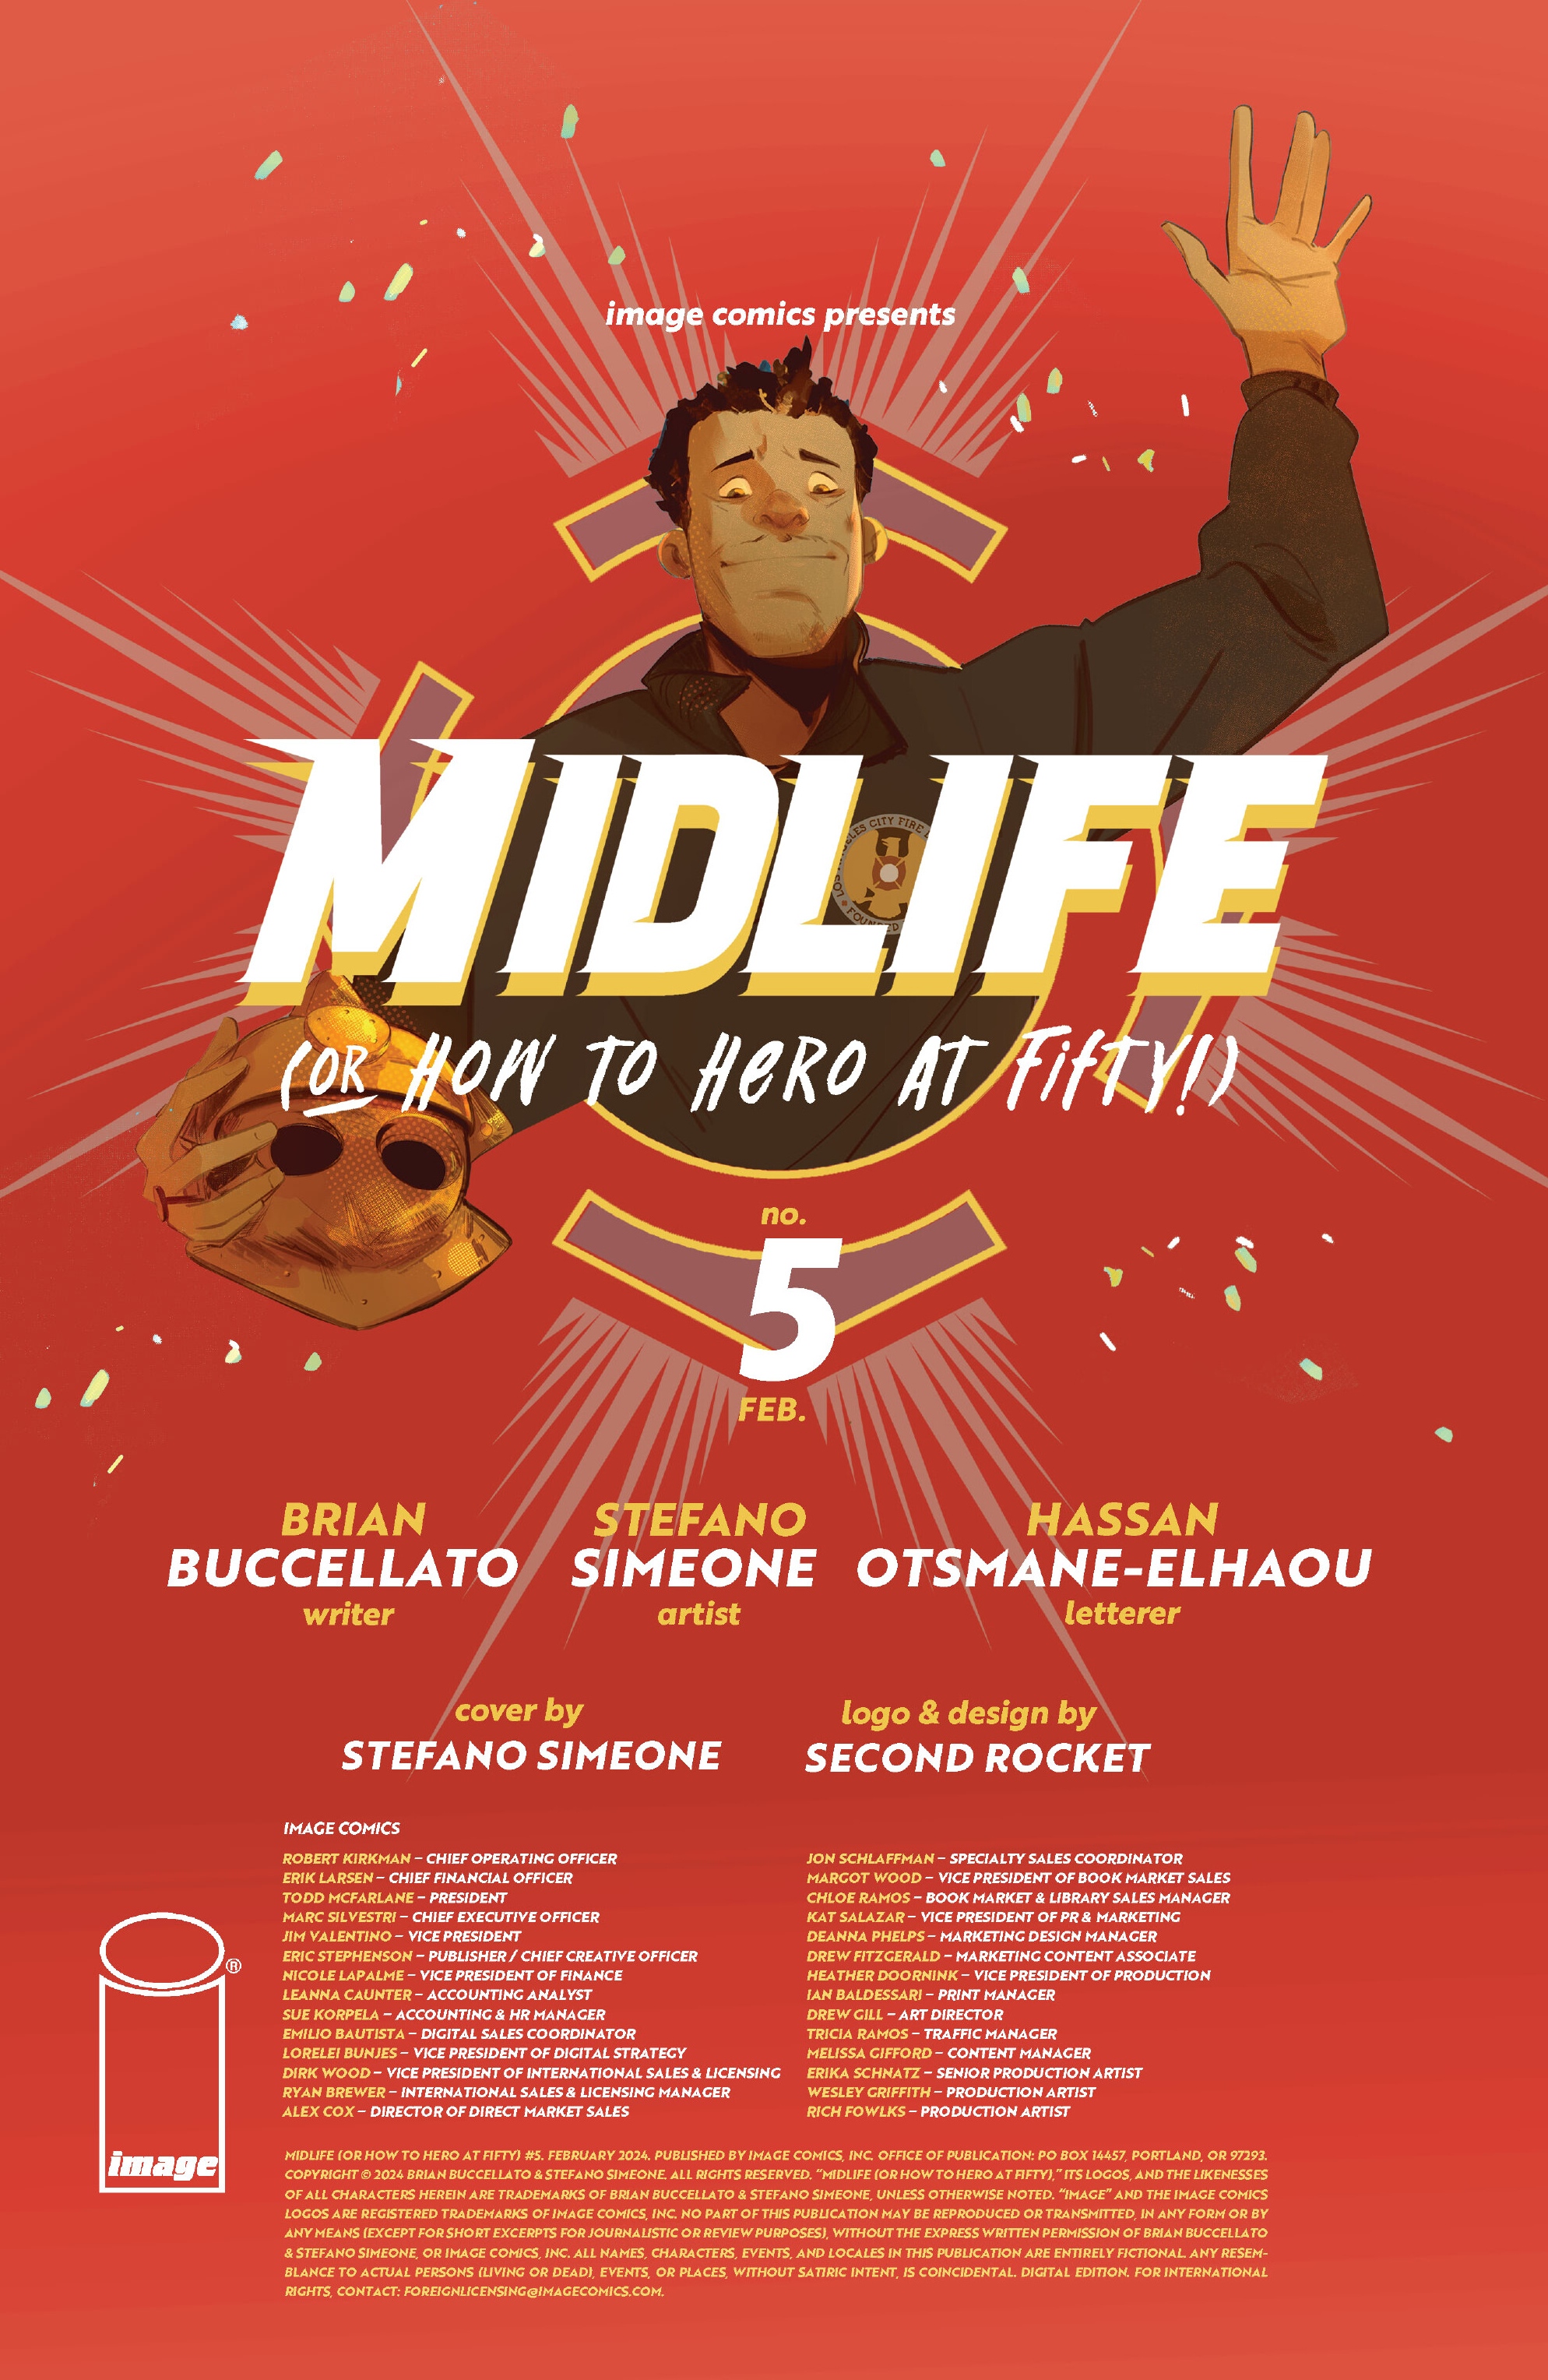 Read online Midlife (or How to Hero at Fifty!) comic -  Issue #5 - 2